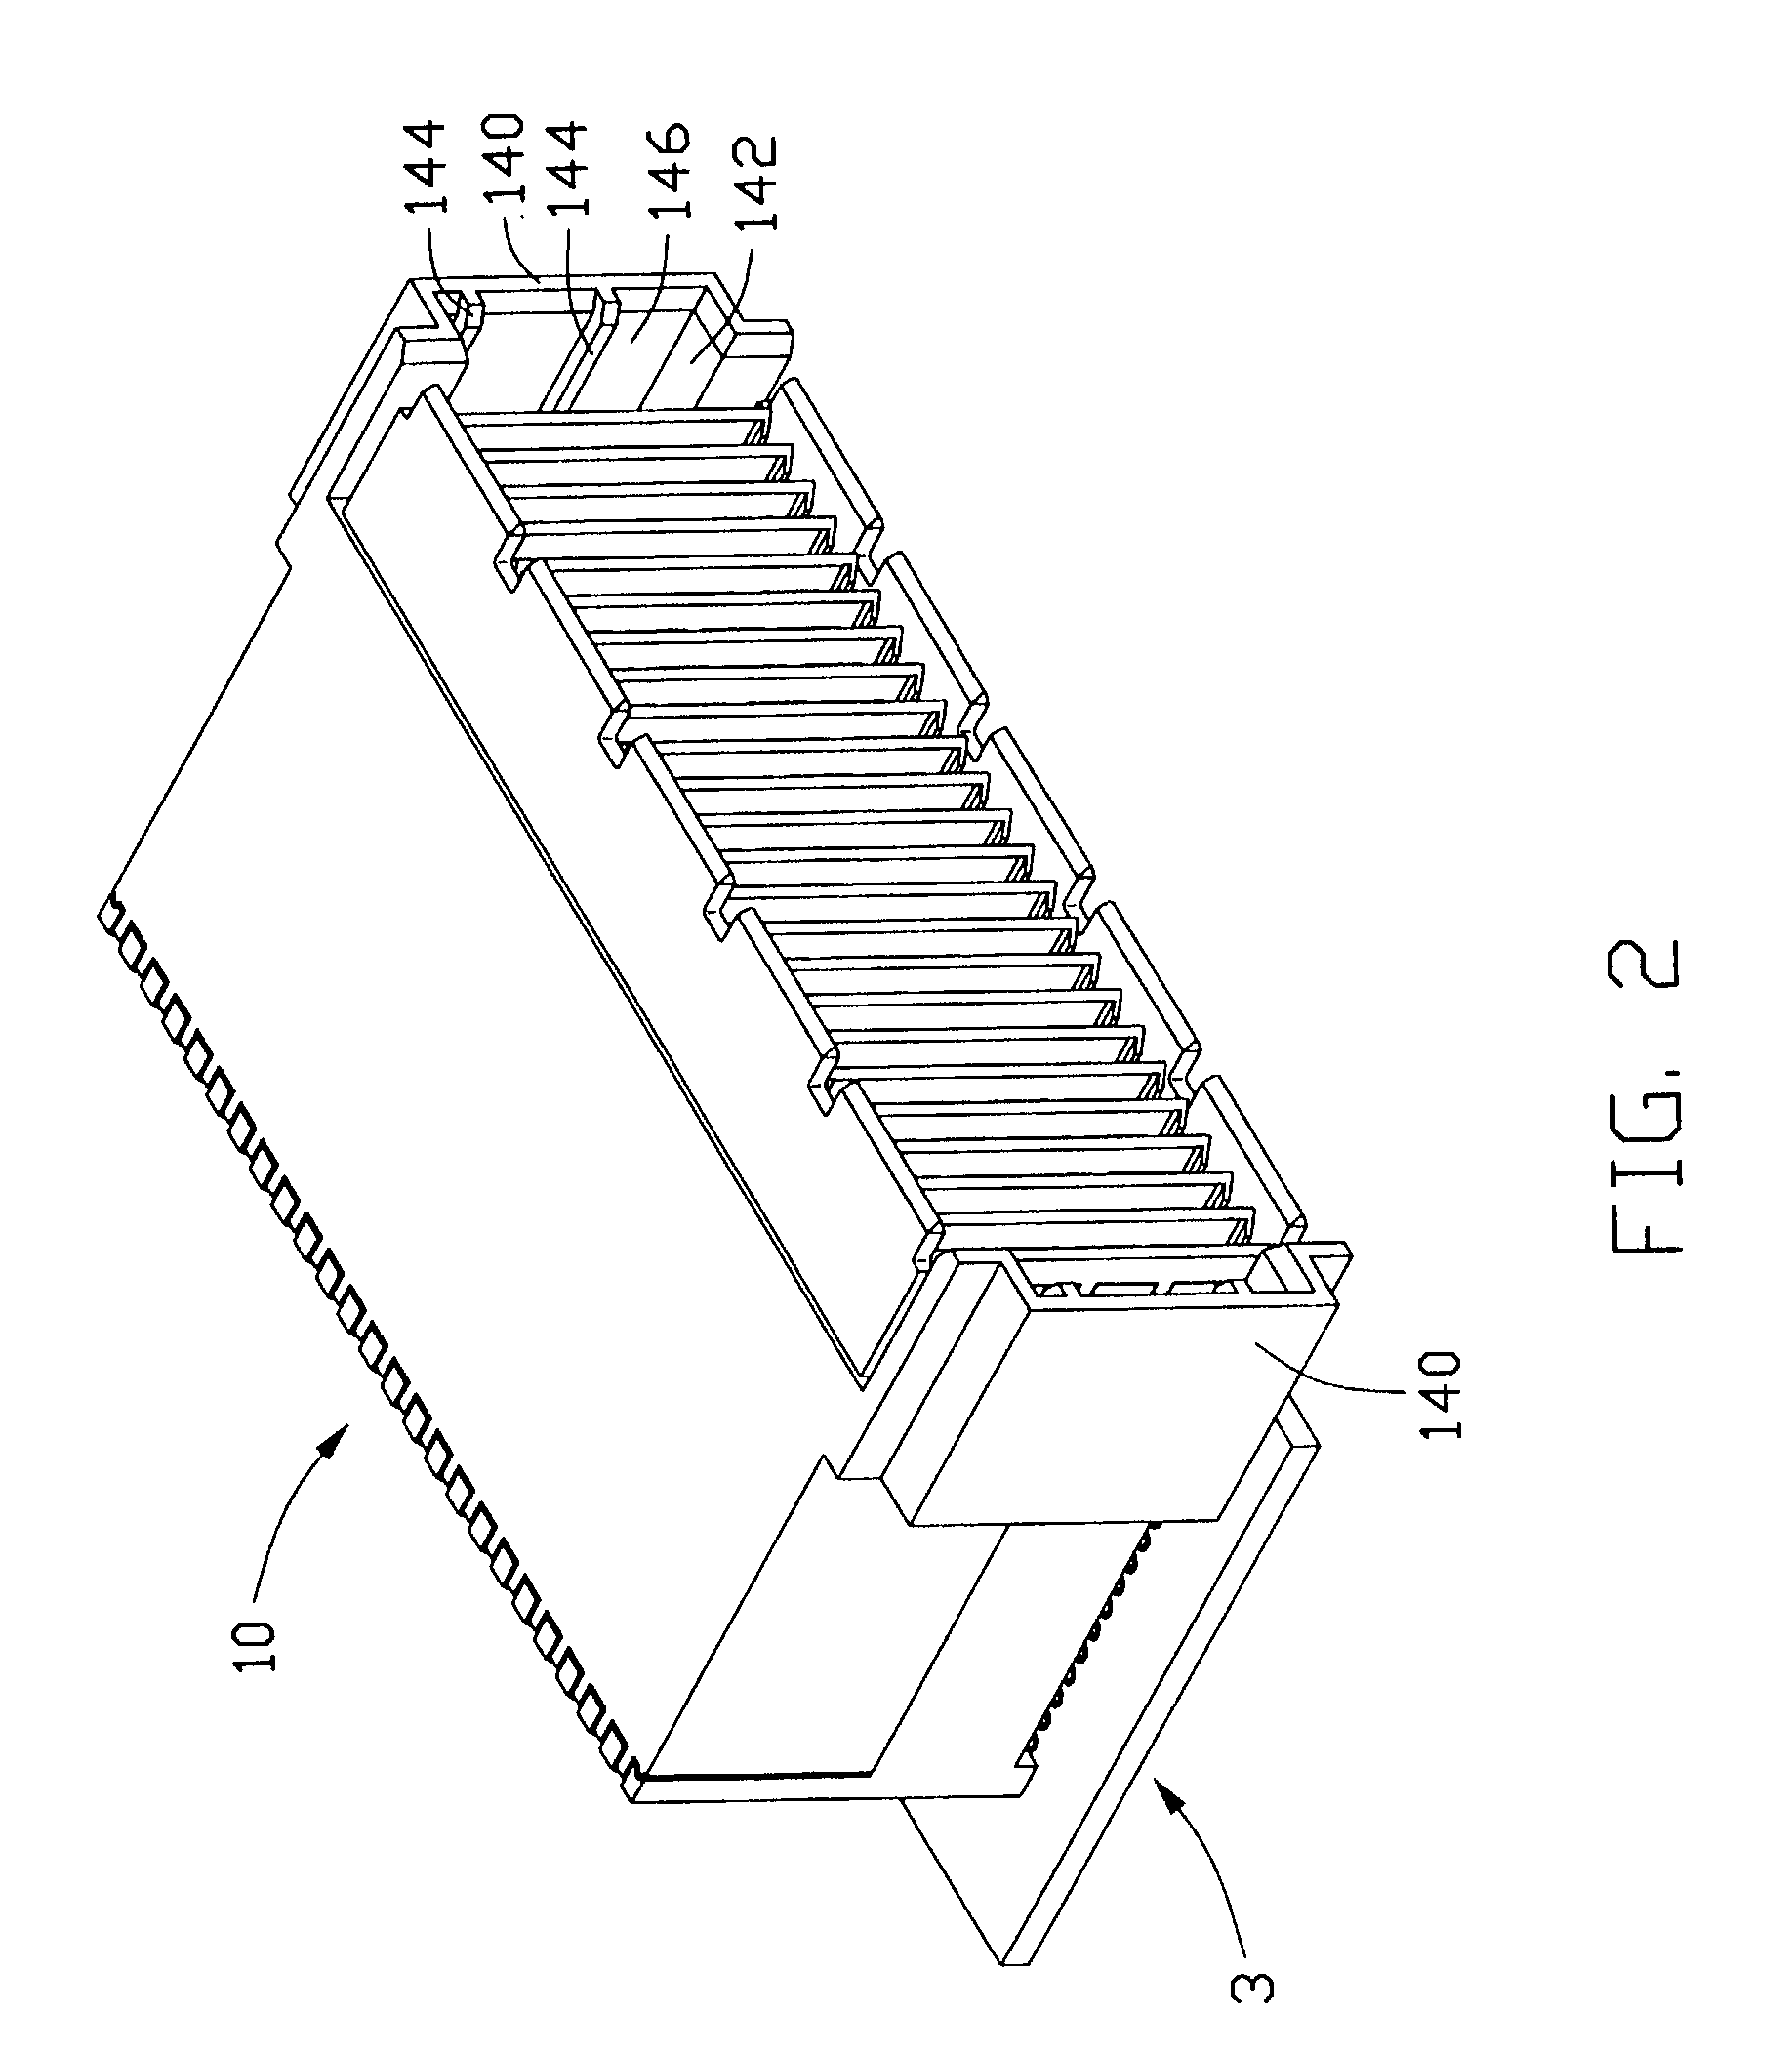 Electrical connector assembly having improved guiding means